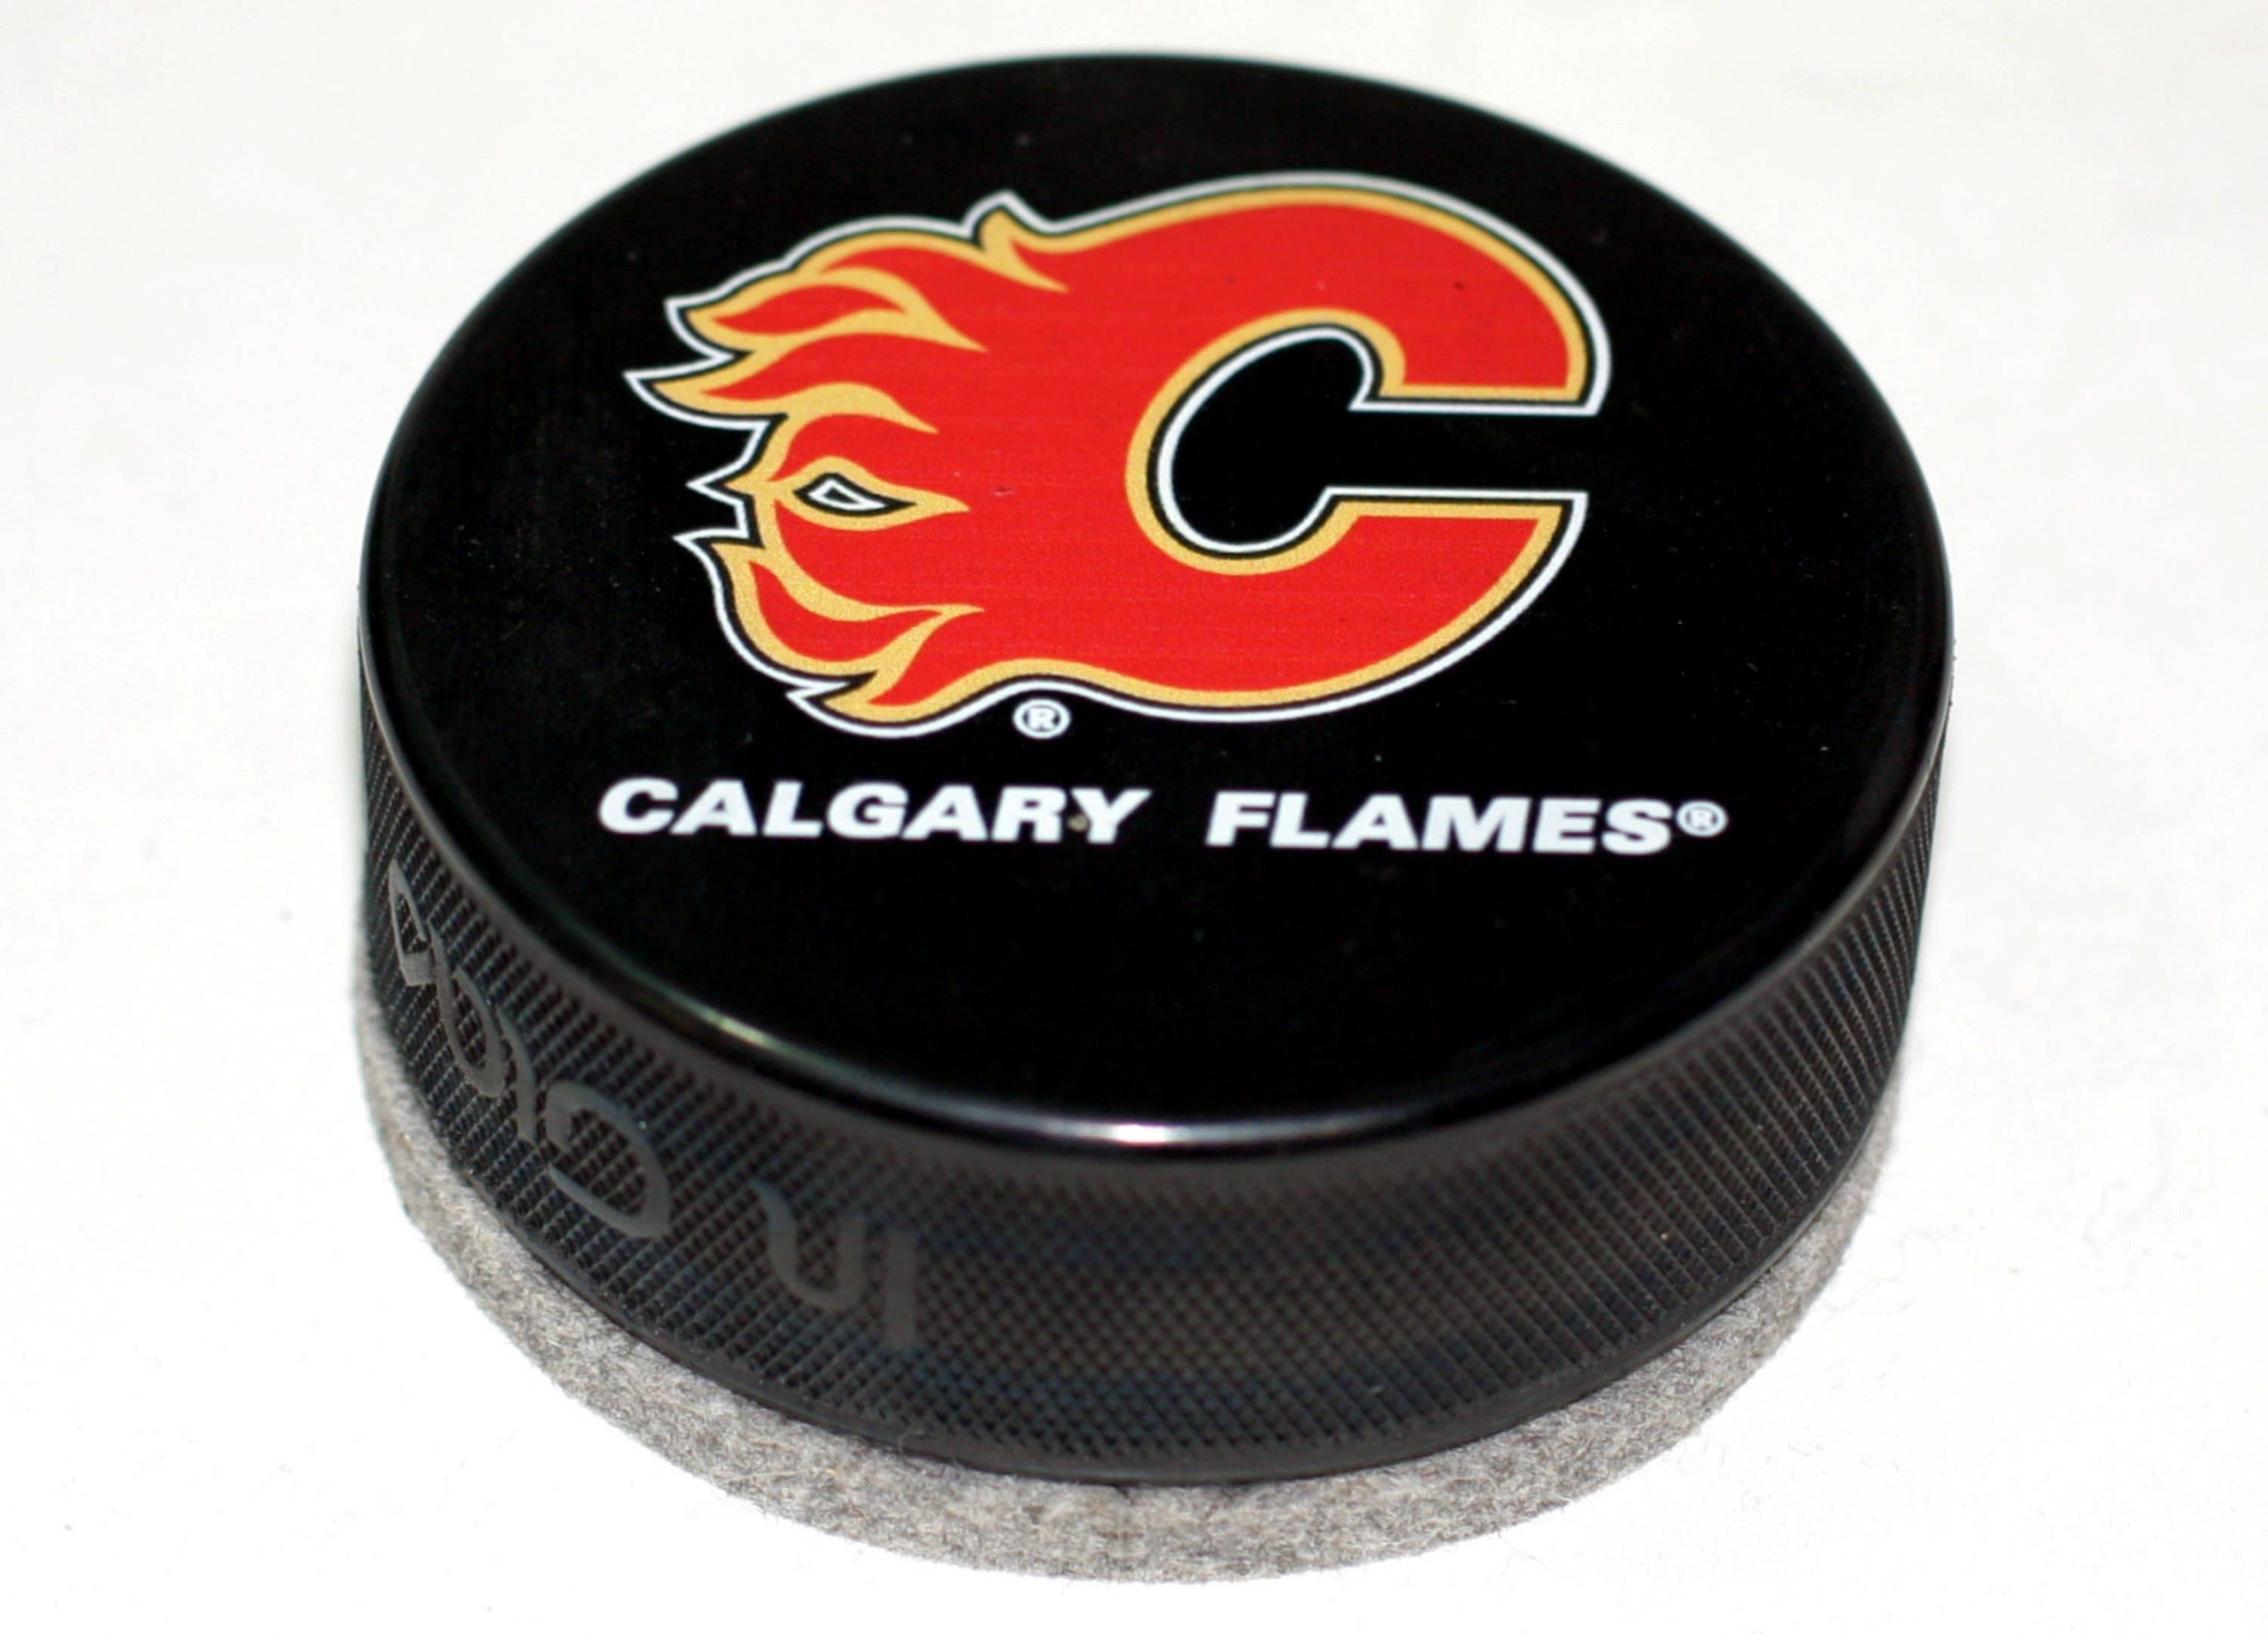 Box with White Flames Red Logo - Calgary Flames Basic Series Hockey Puck Board Eraser For Chalk ...